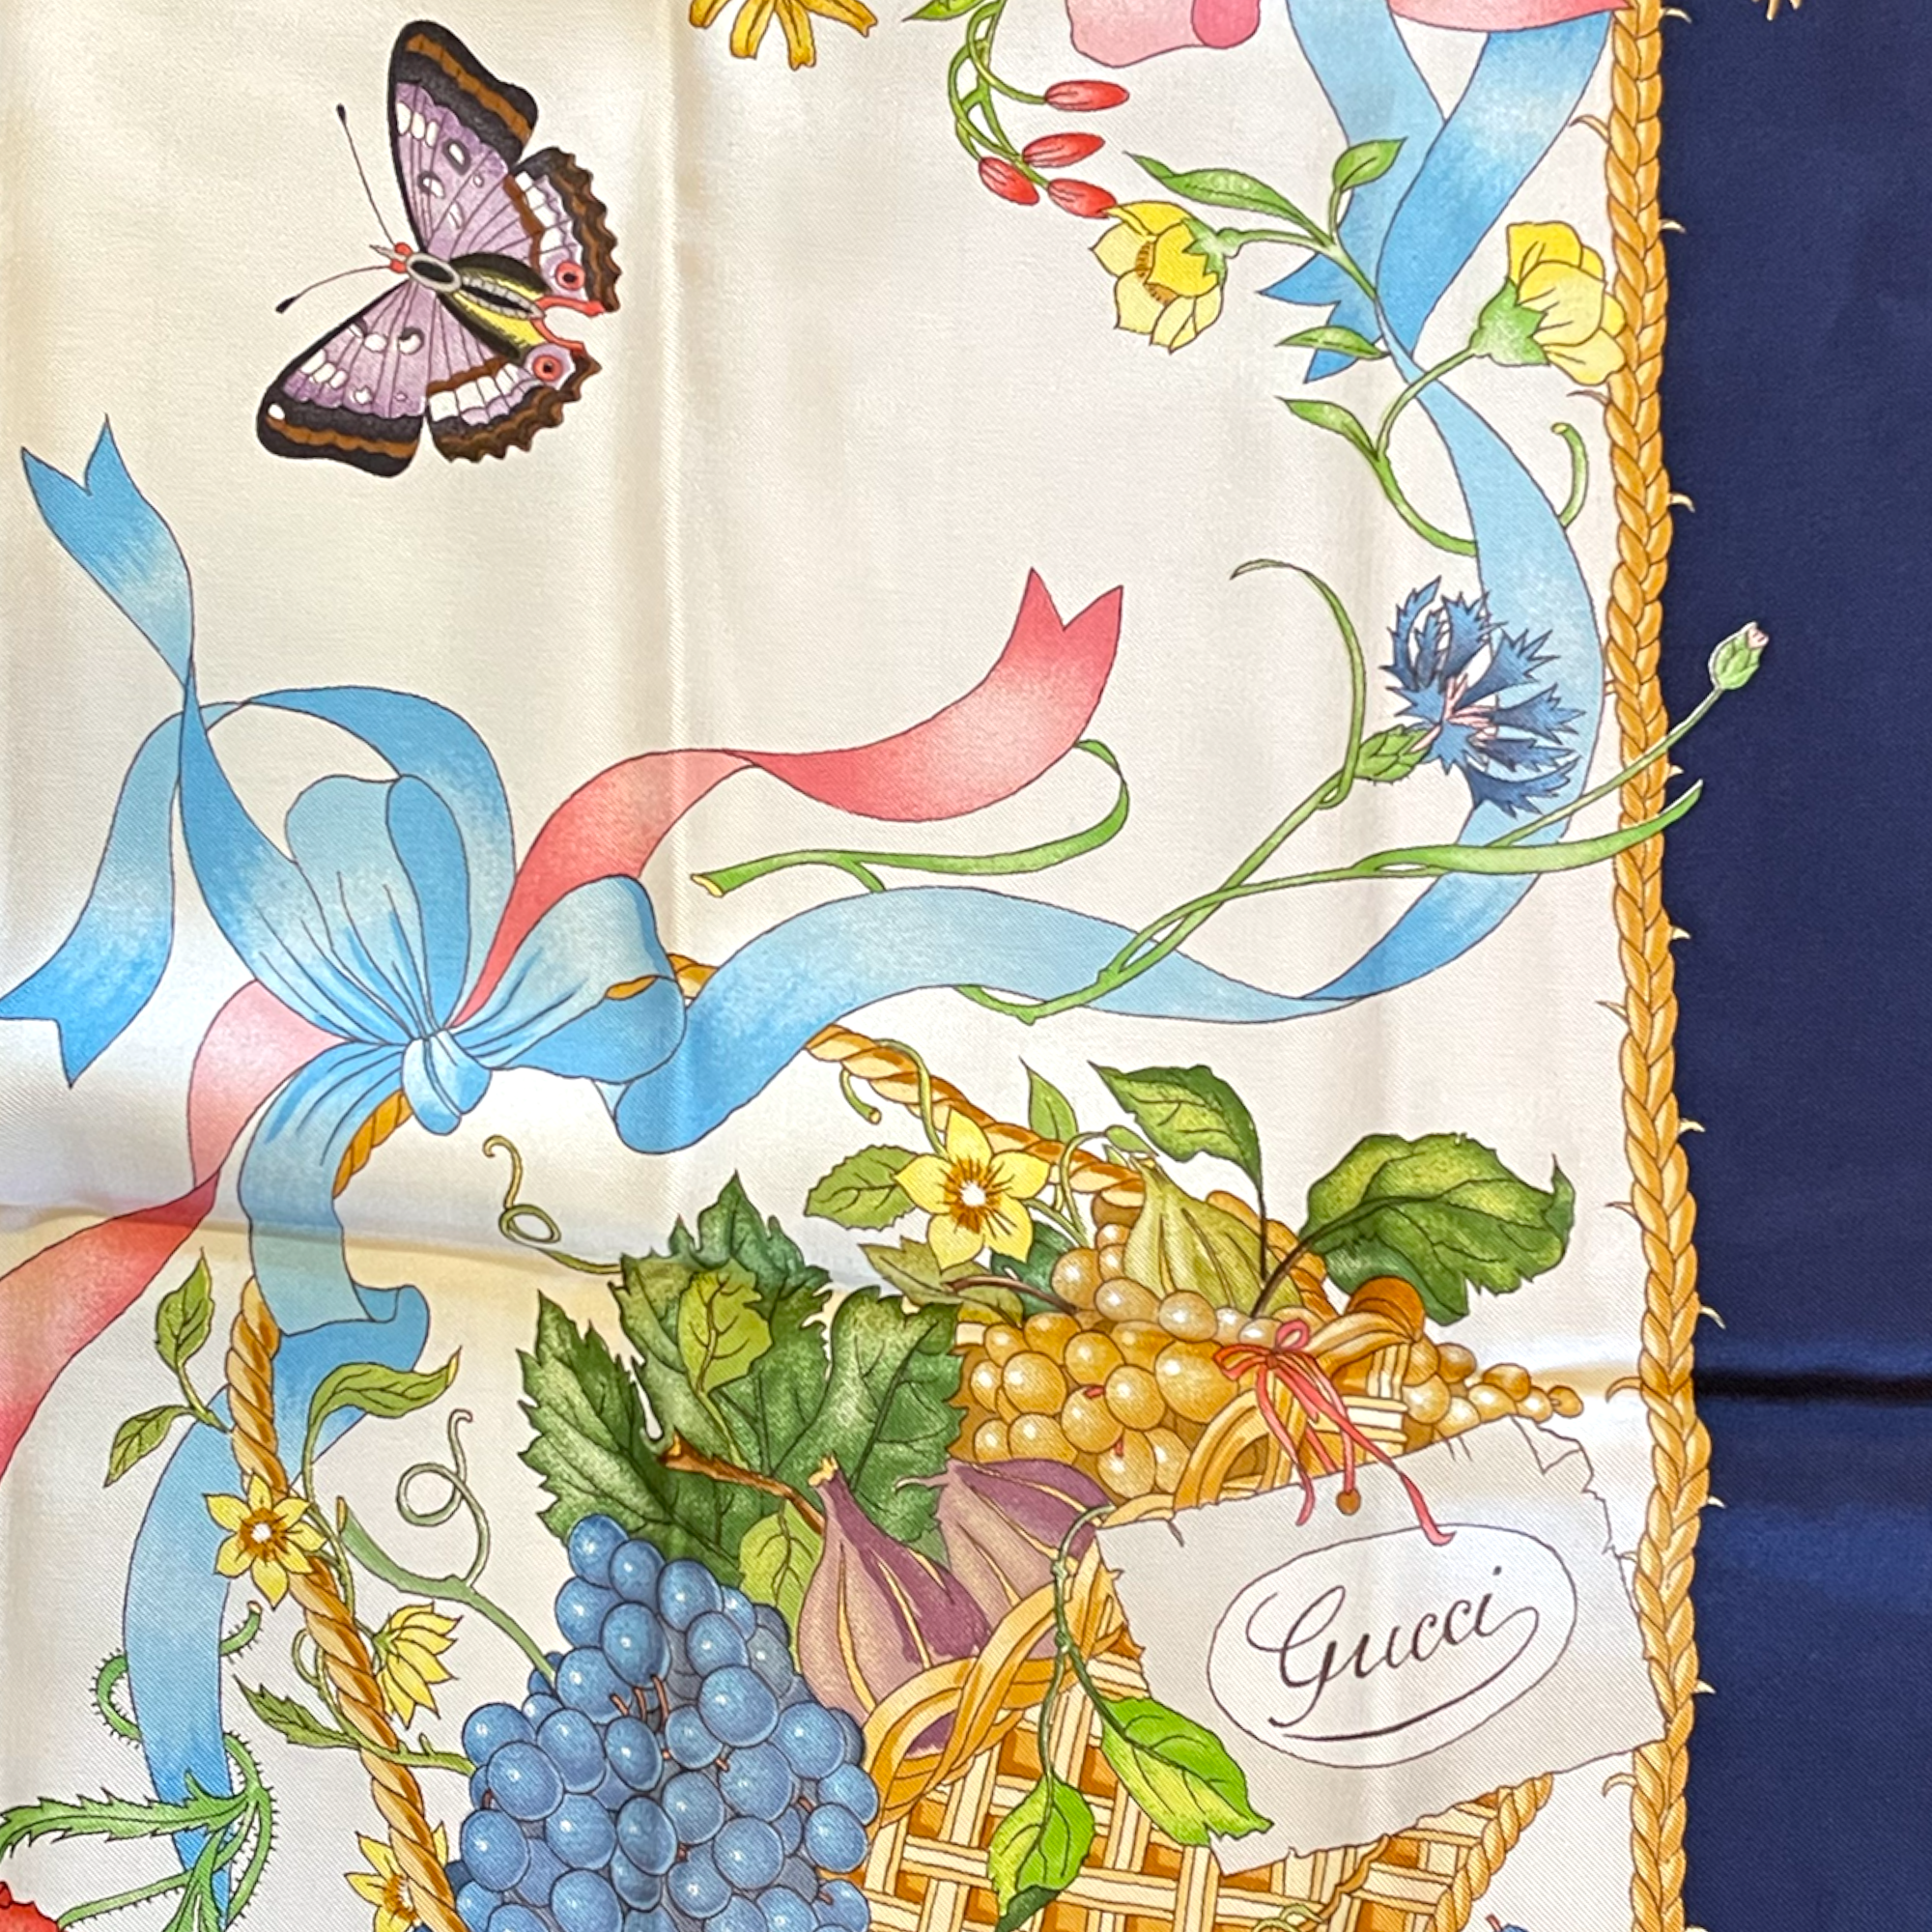 Vintage Gucci Silk Butterfly and Fruit Scarf         34” x 34”